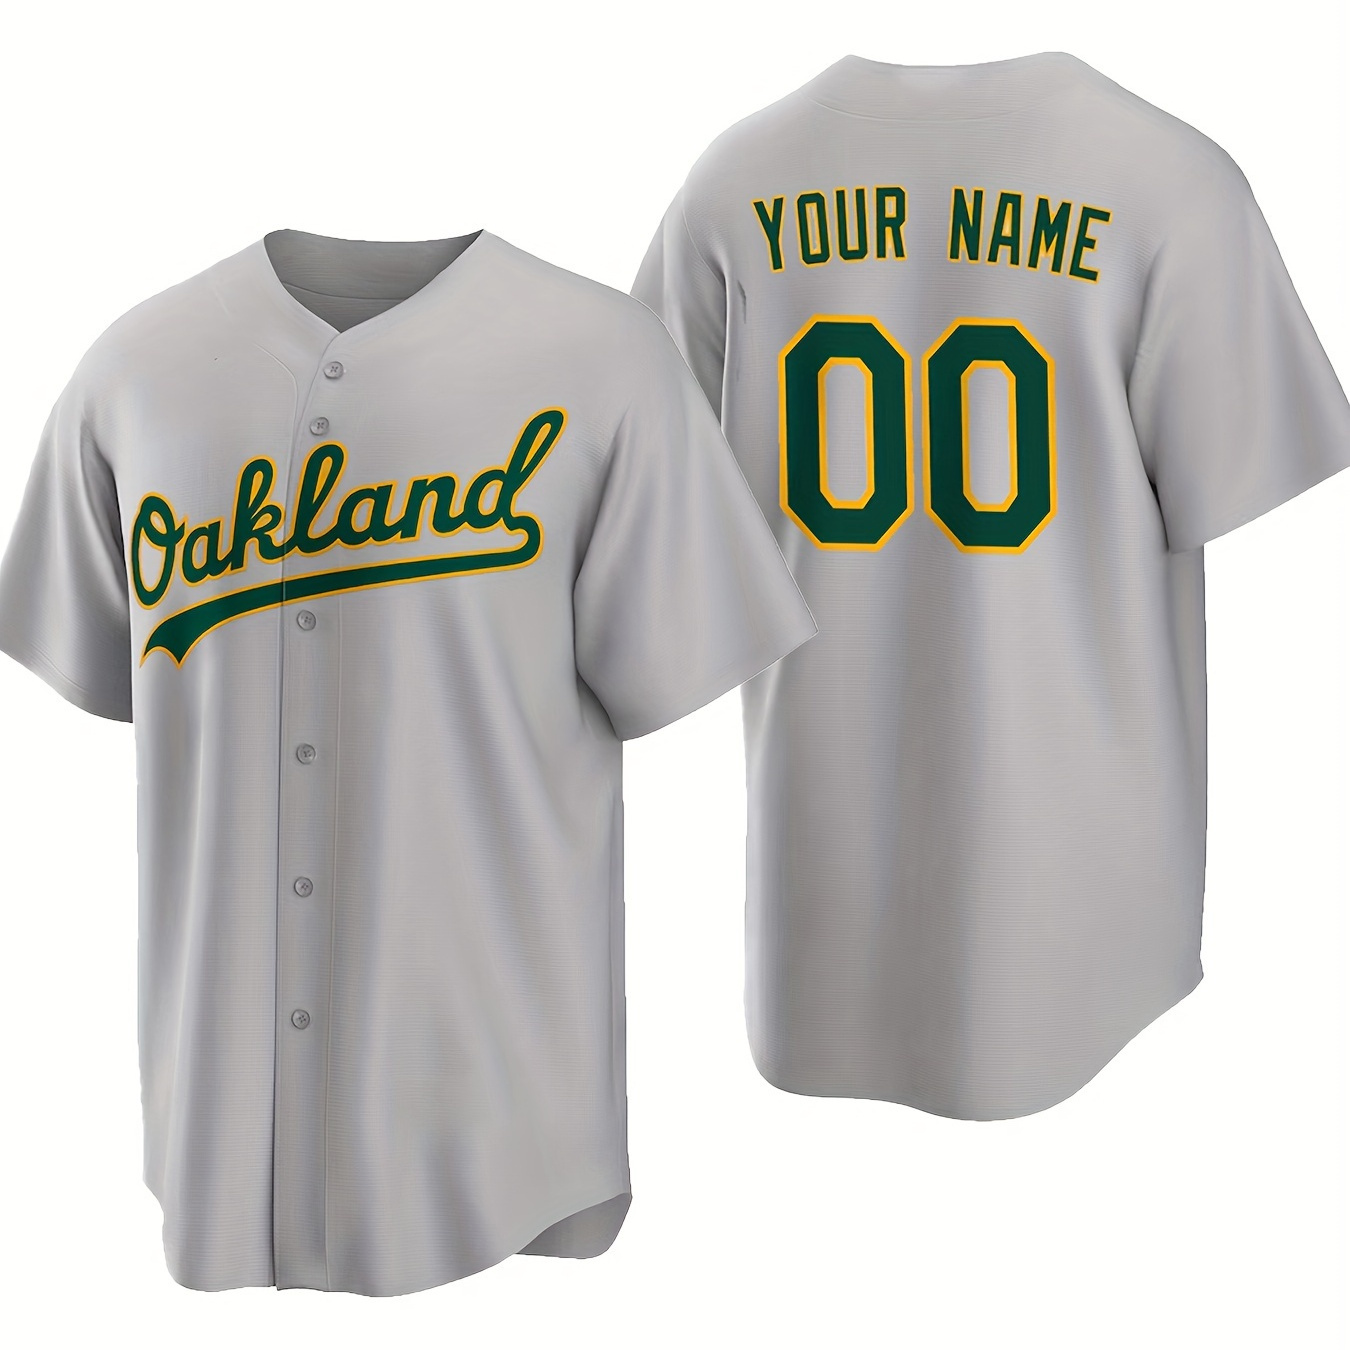 

Personalized Custom Baseball Jersey Shirt For Men, Your Diy Name Numbers & Oakland Graphic Print Short Sleeve Button Up Shirt For Competition Party Training